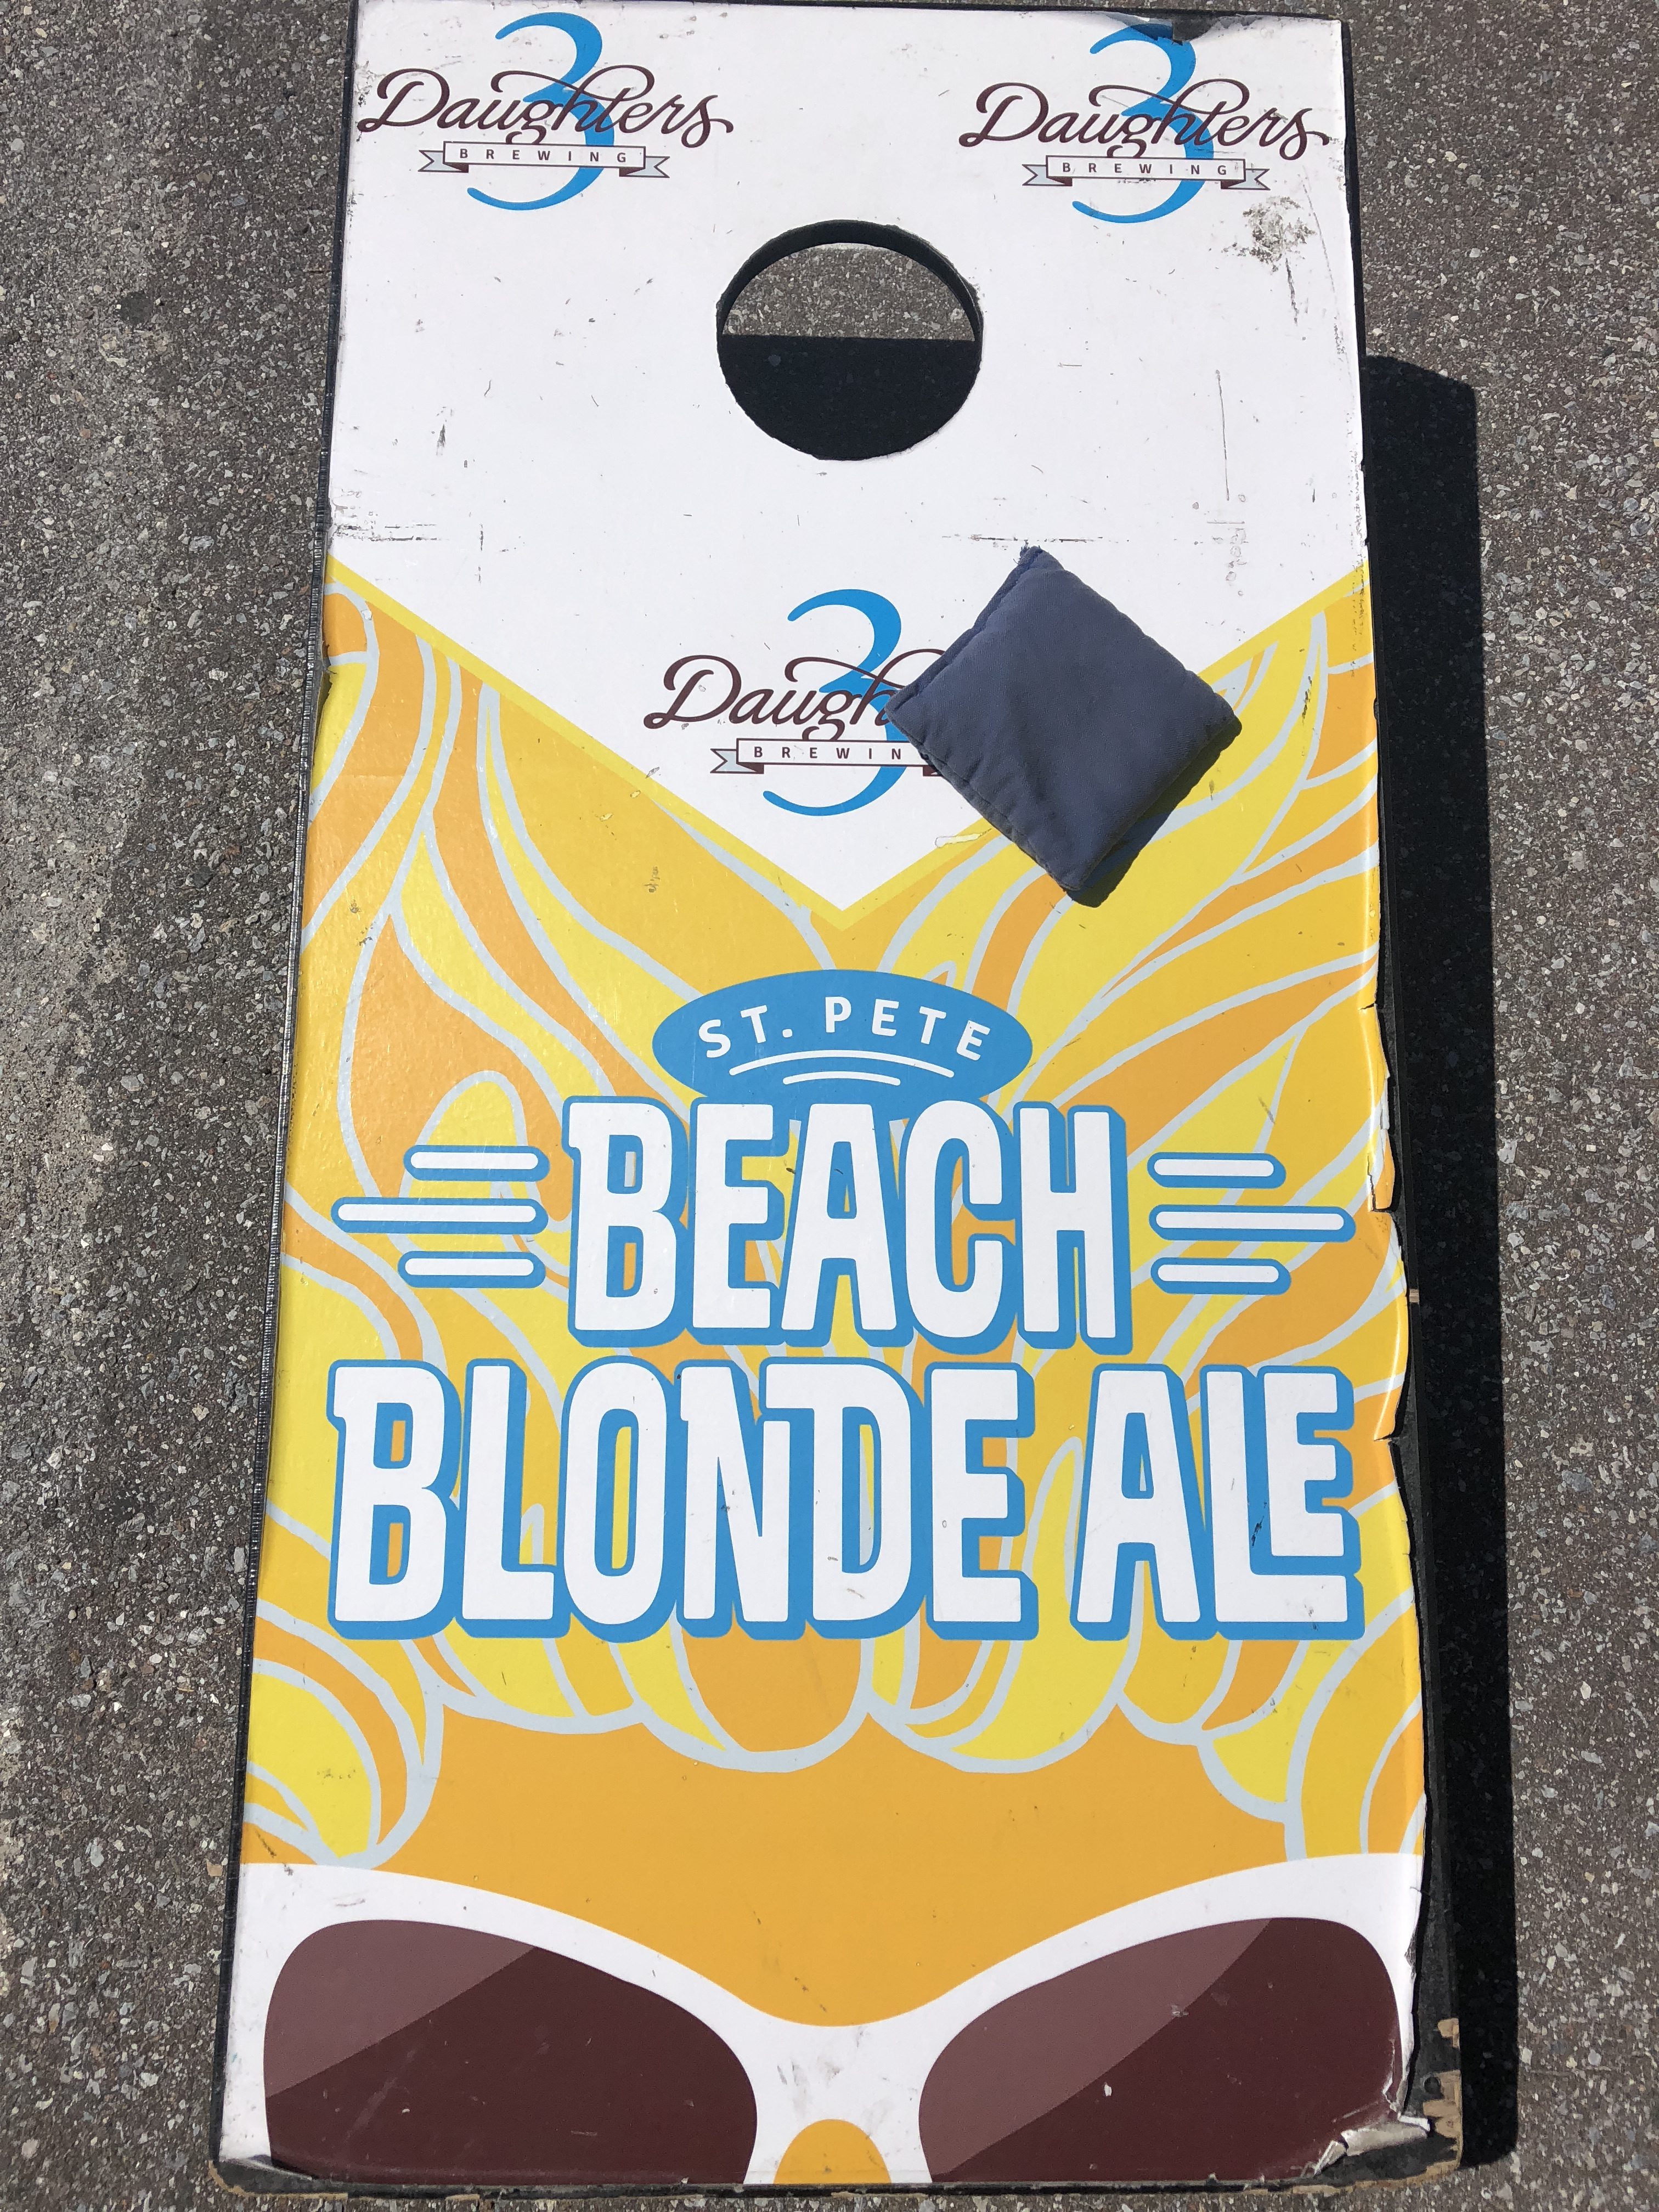 There are a handful of cornhole boards outside of the brewery